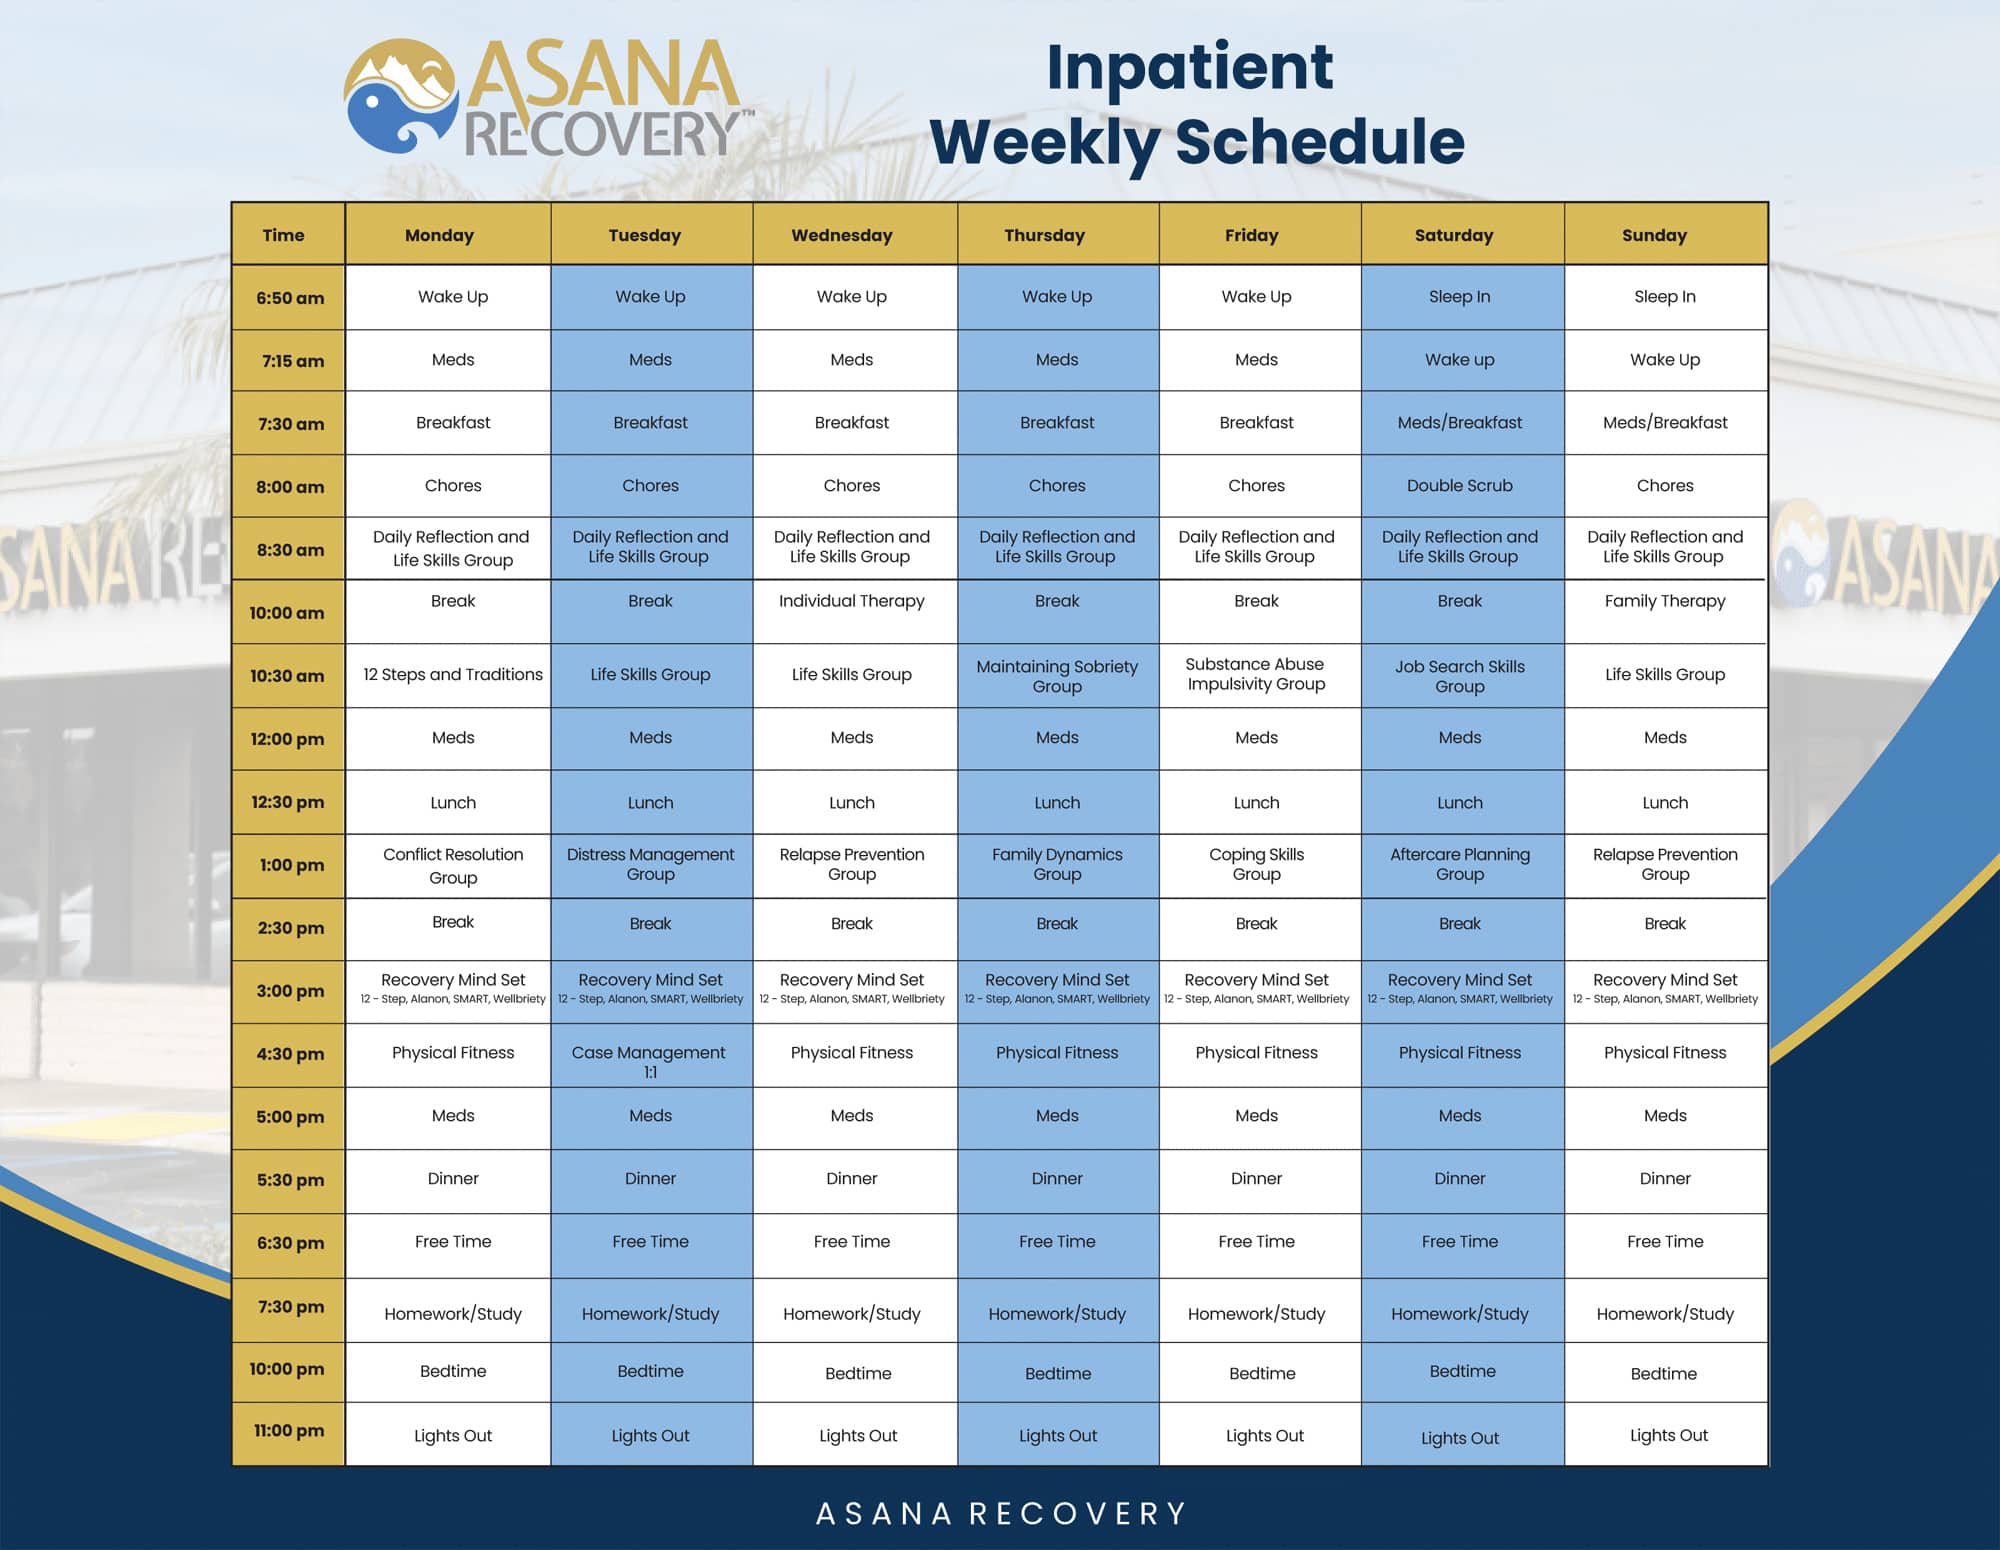 Asana Recovery Inpatient Weekly Schedule